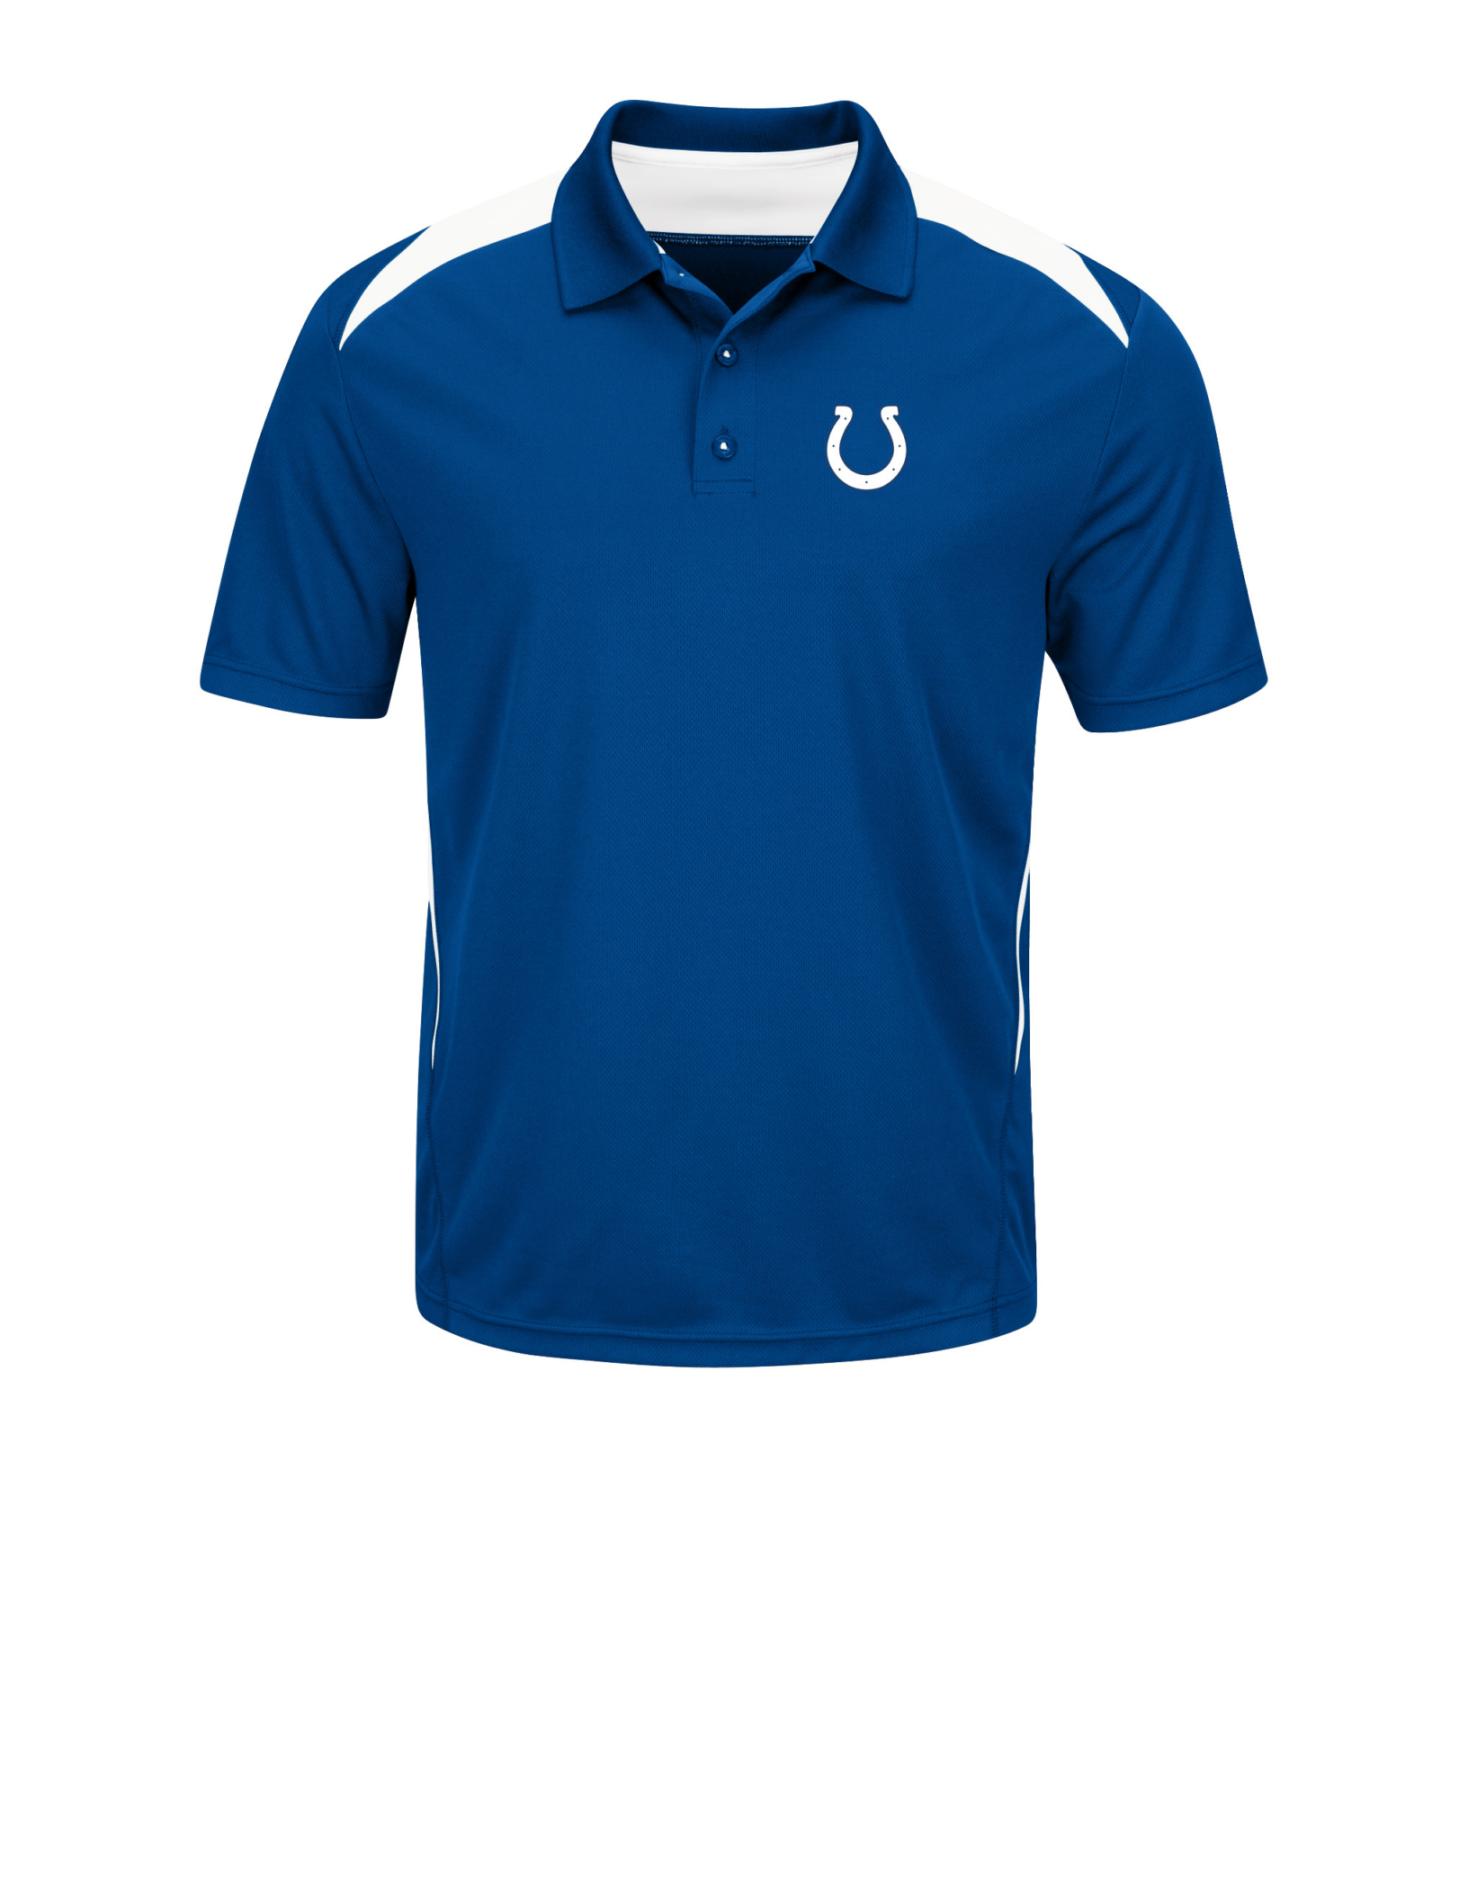 NFL Men's Polo Shirt - Indianapolis Colts